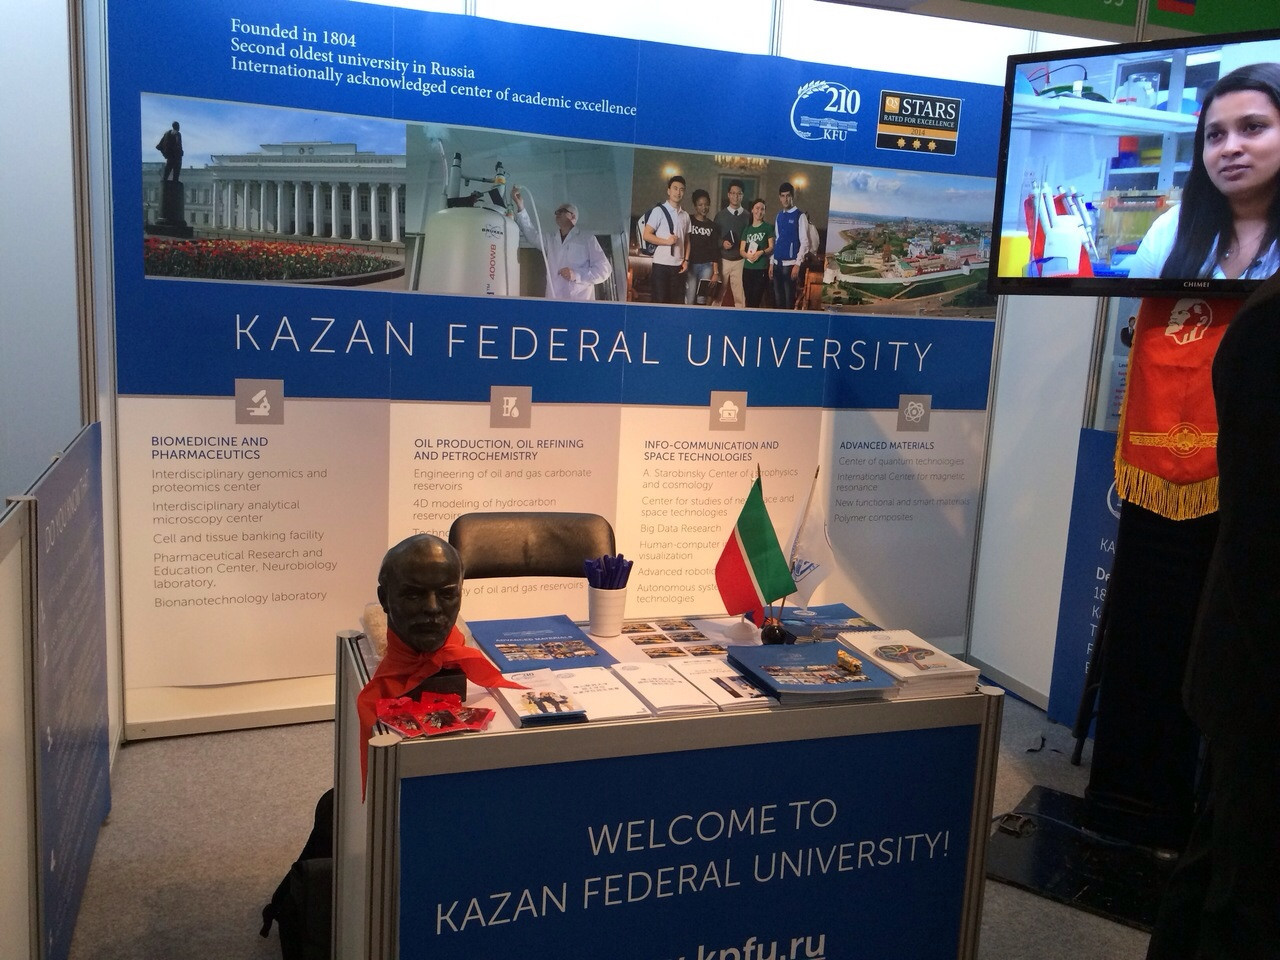 KFU at QS-APPLE Higher Education Conference & Exhibition